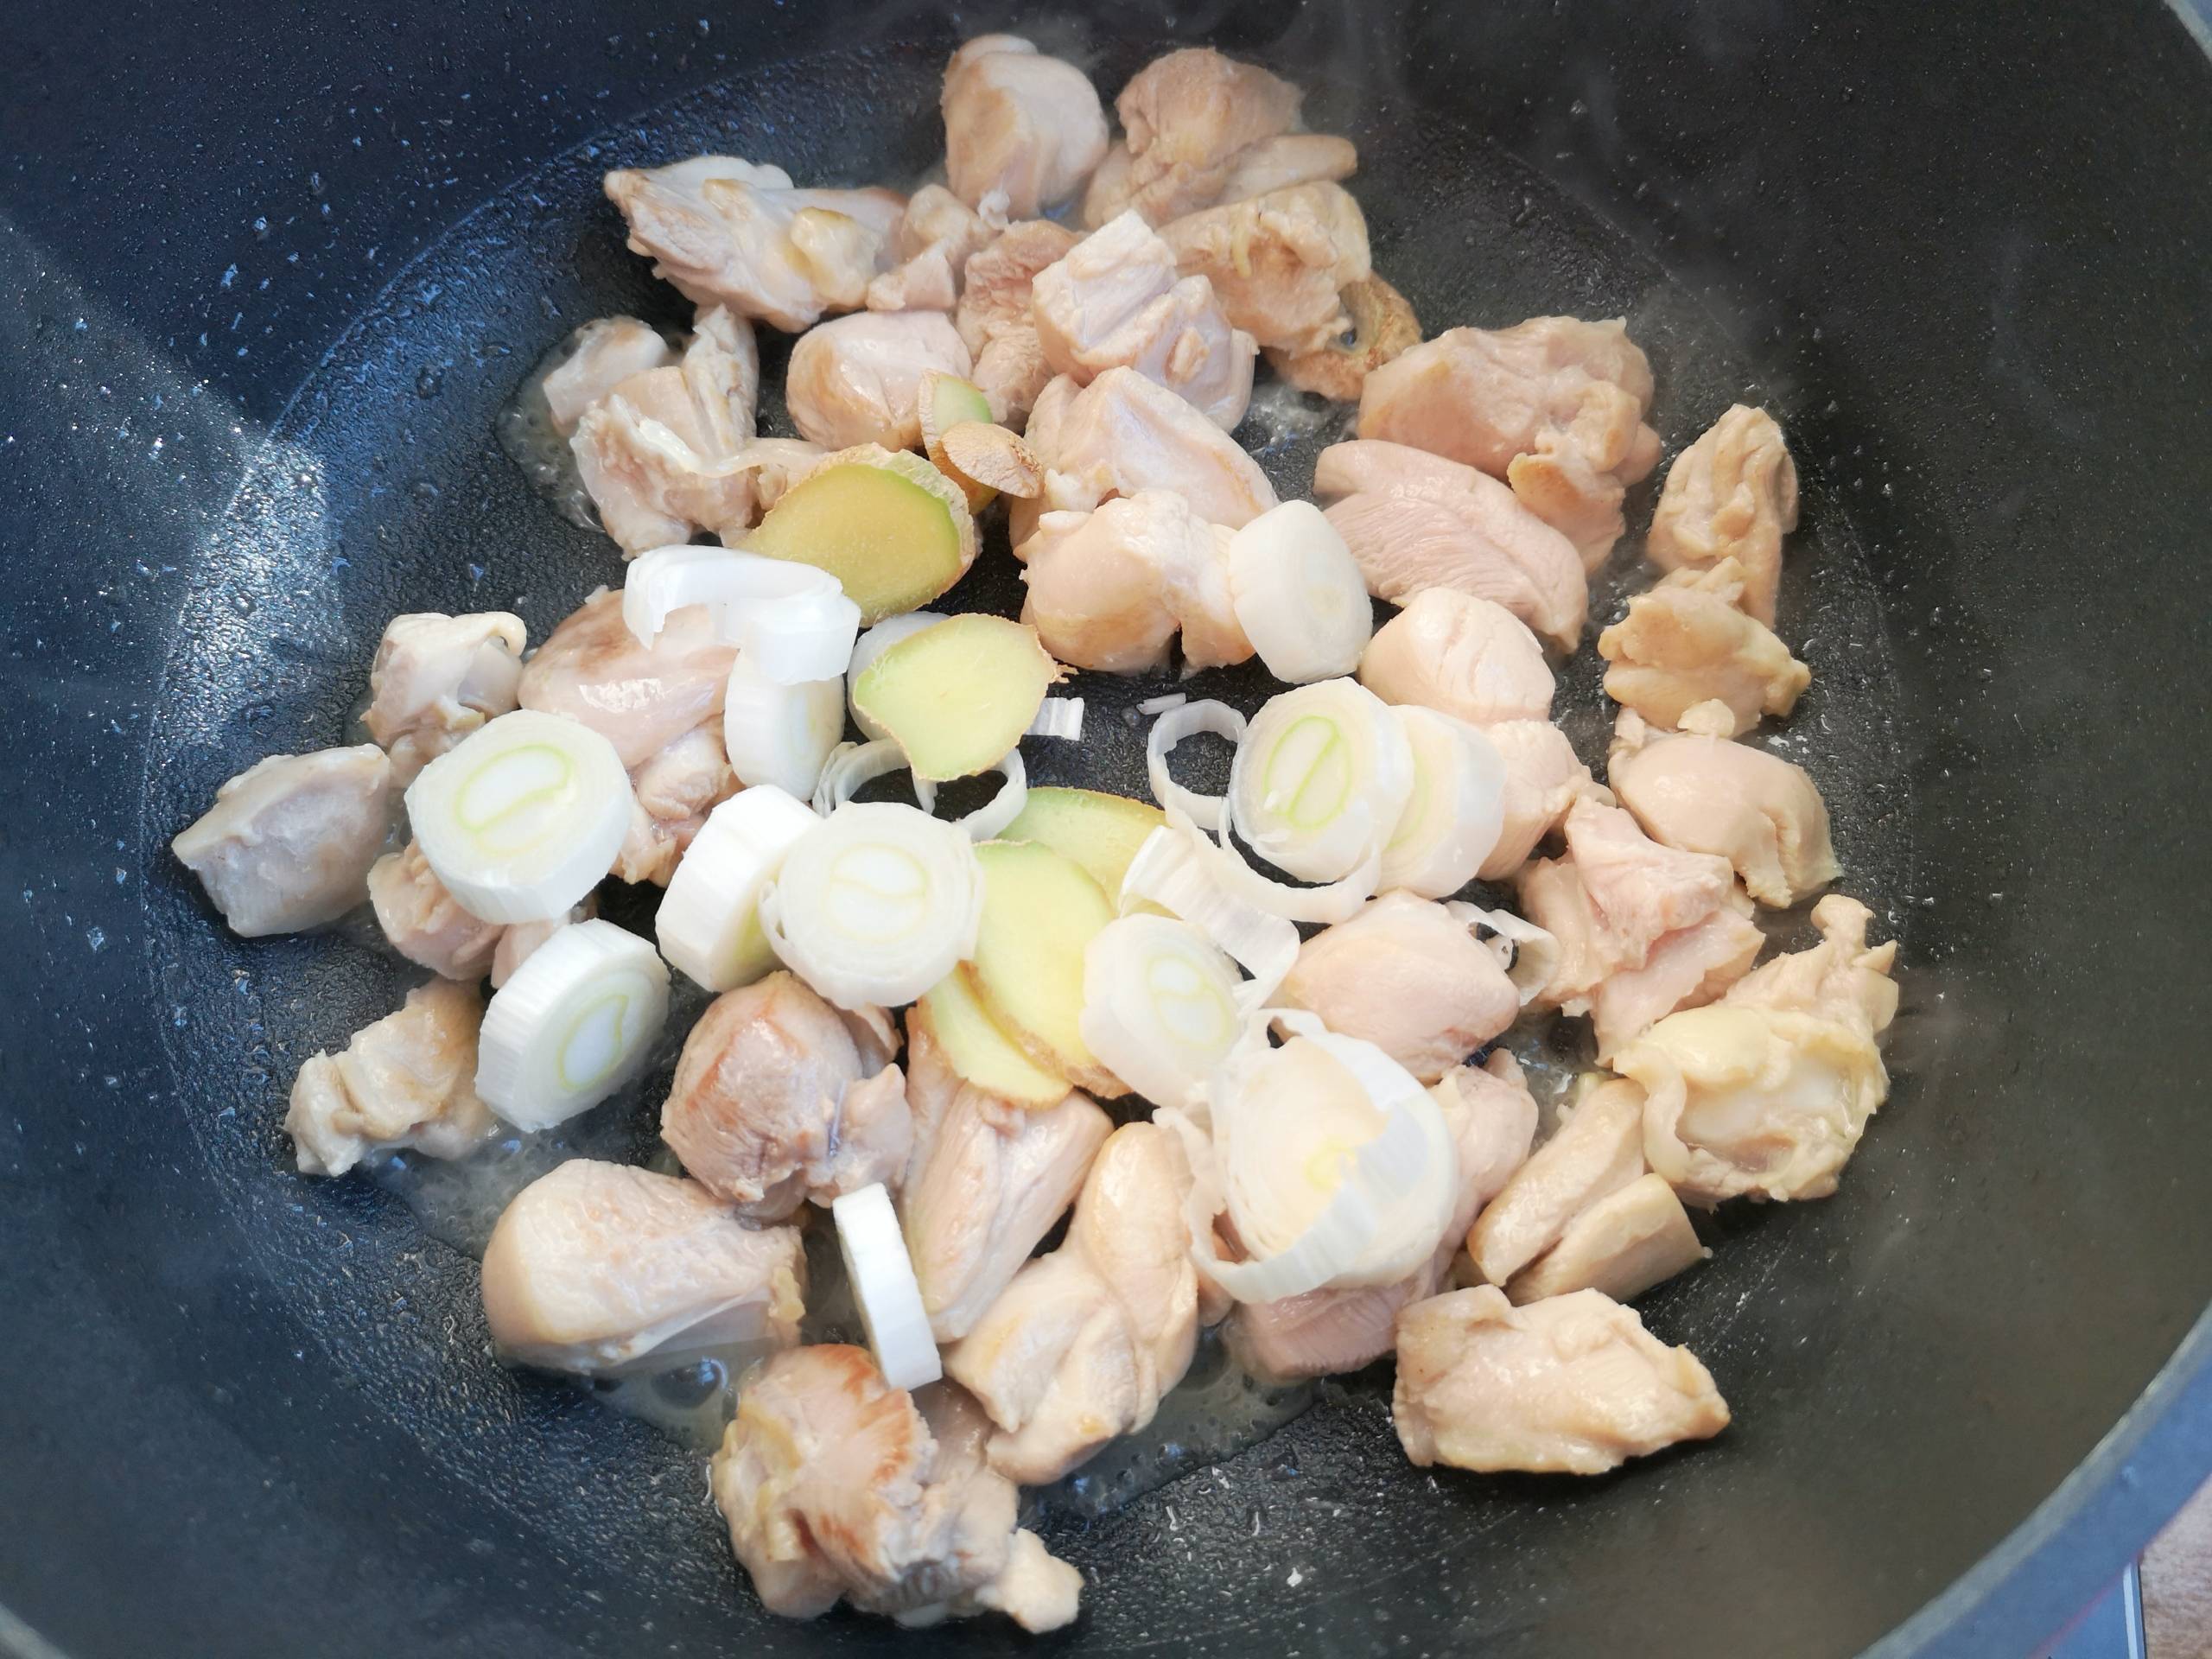 Super Simple and Delicious Chestnut Yellow Stewed Chicken, The Family Makes Every Week recipe